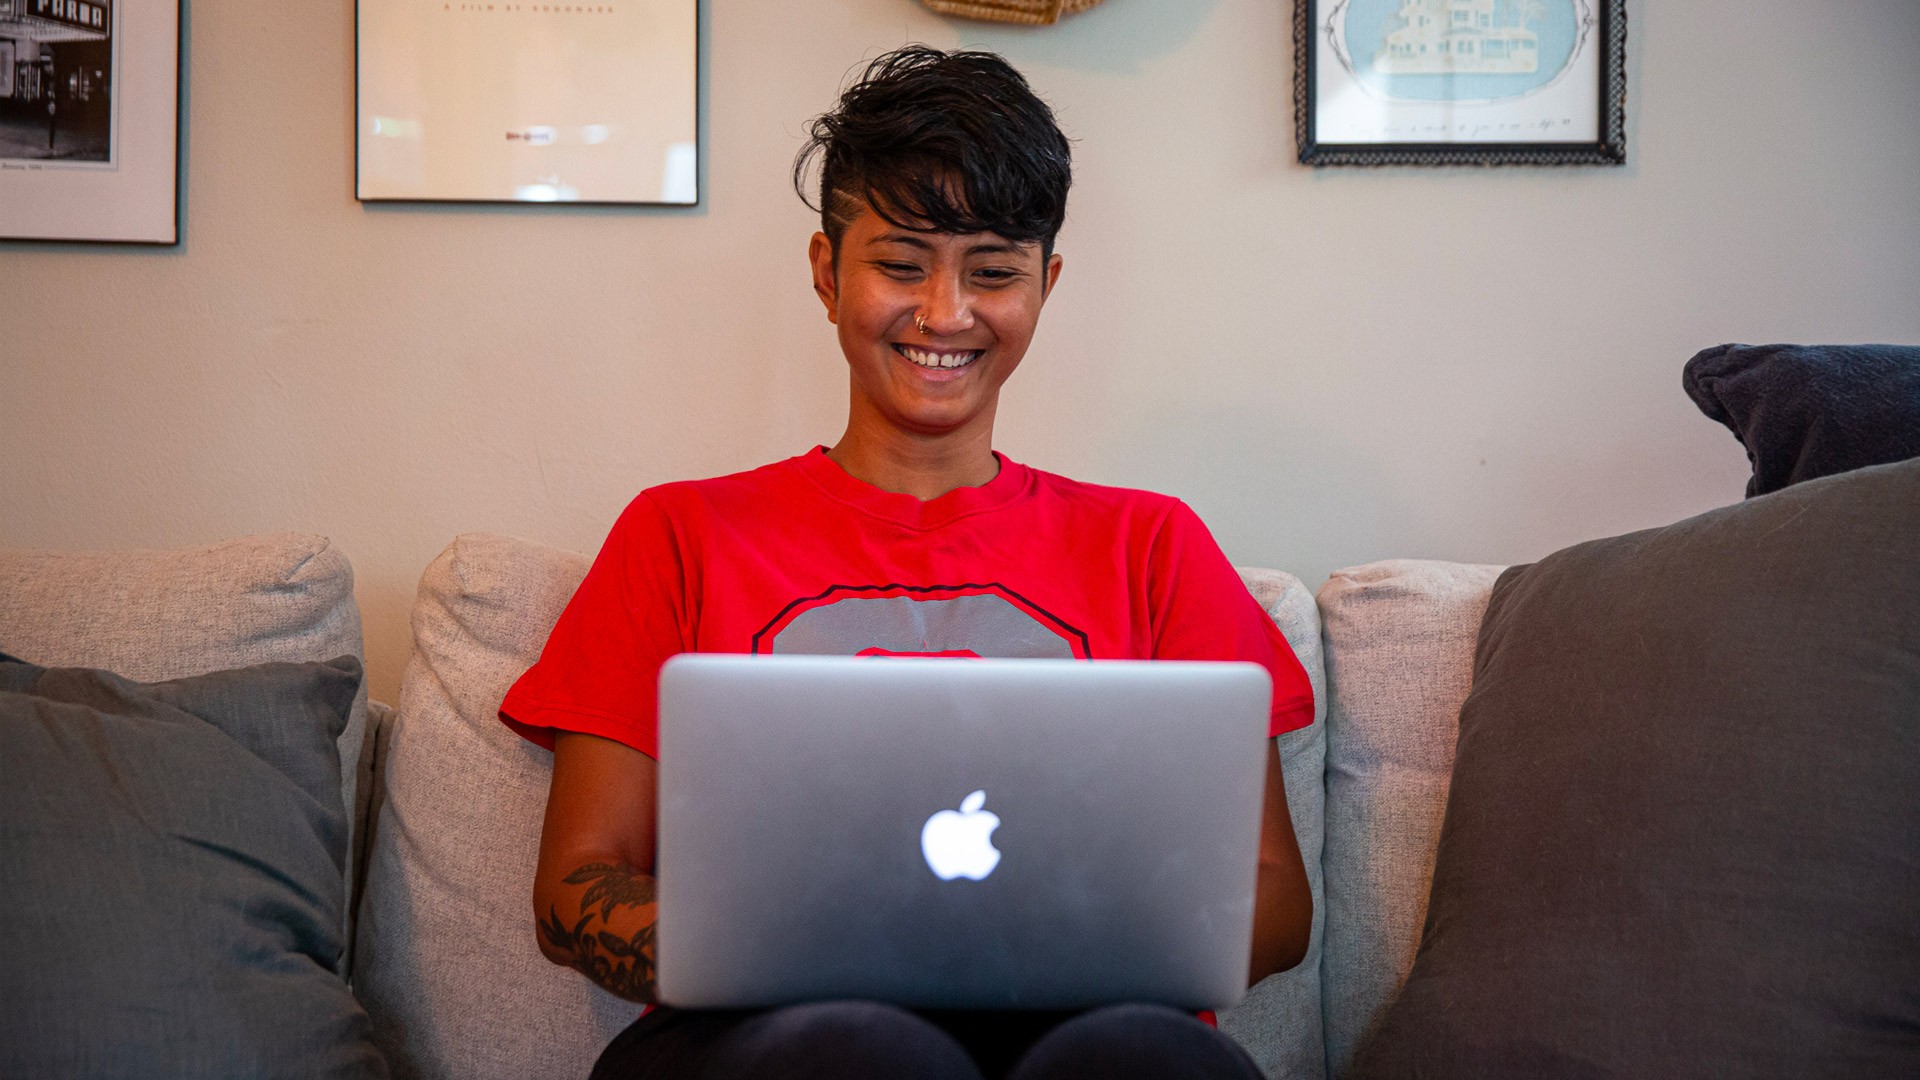 Ohio State student using laptop at home